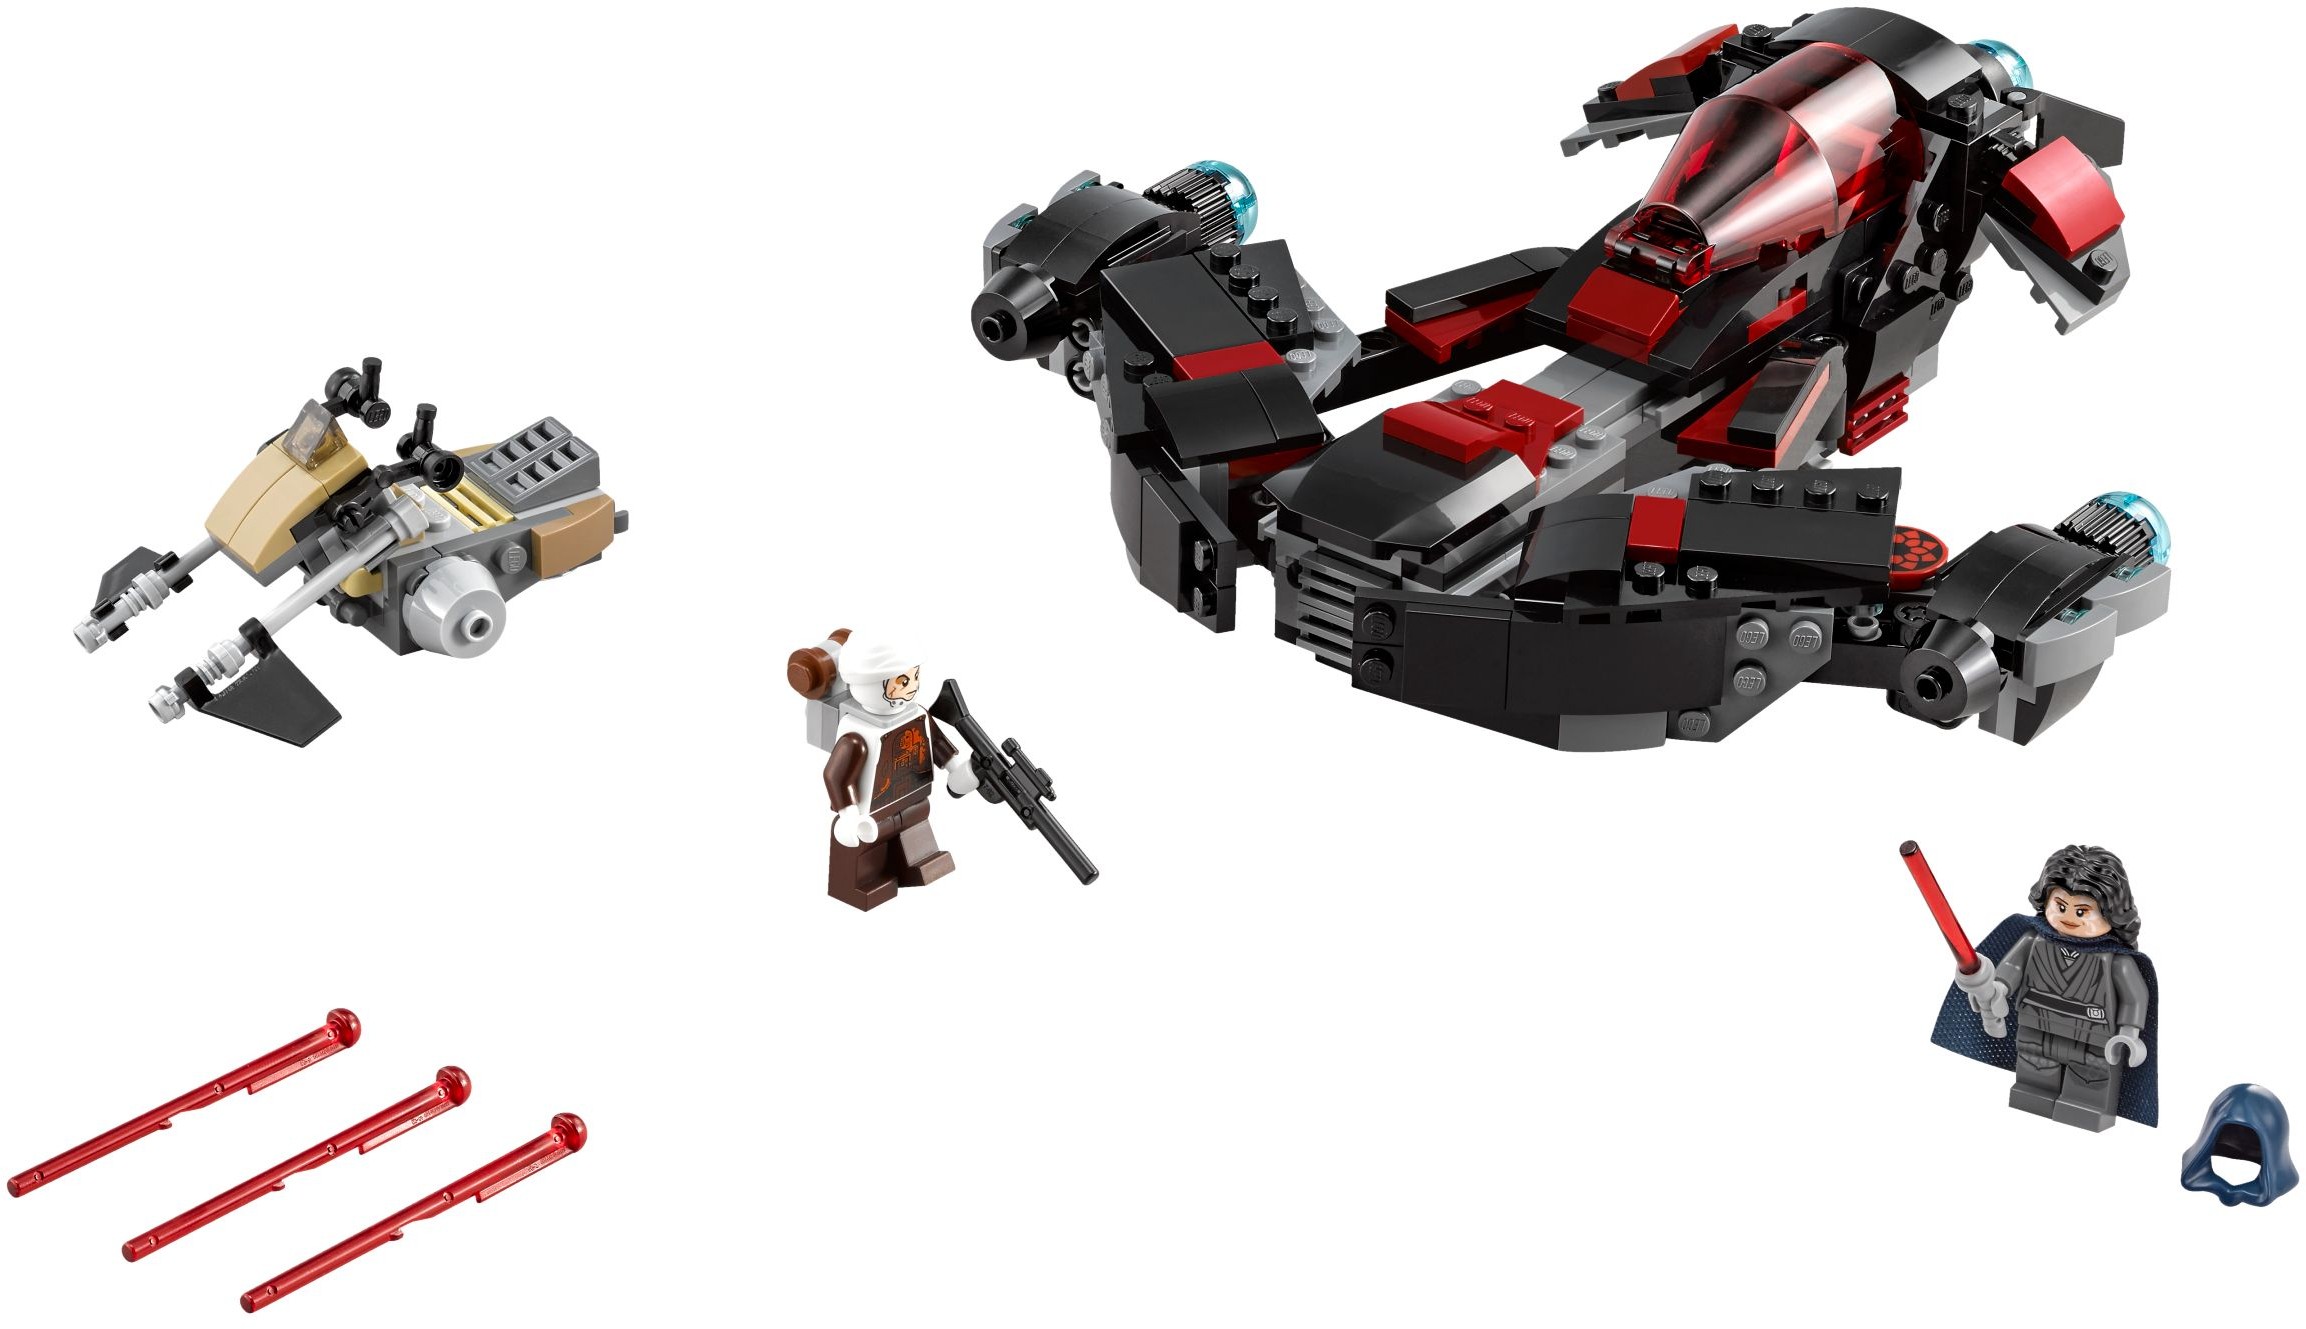 Star Wars And Lego: Taking Over The Galaxy